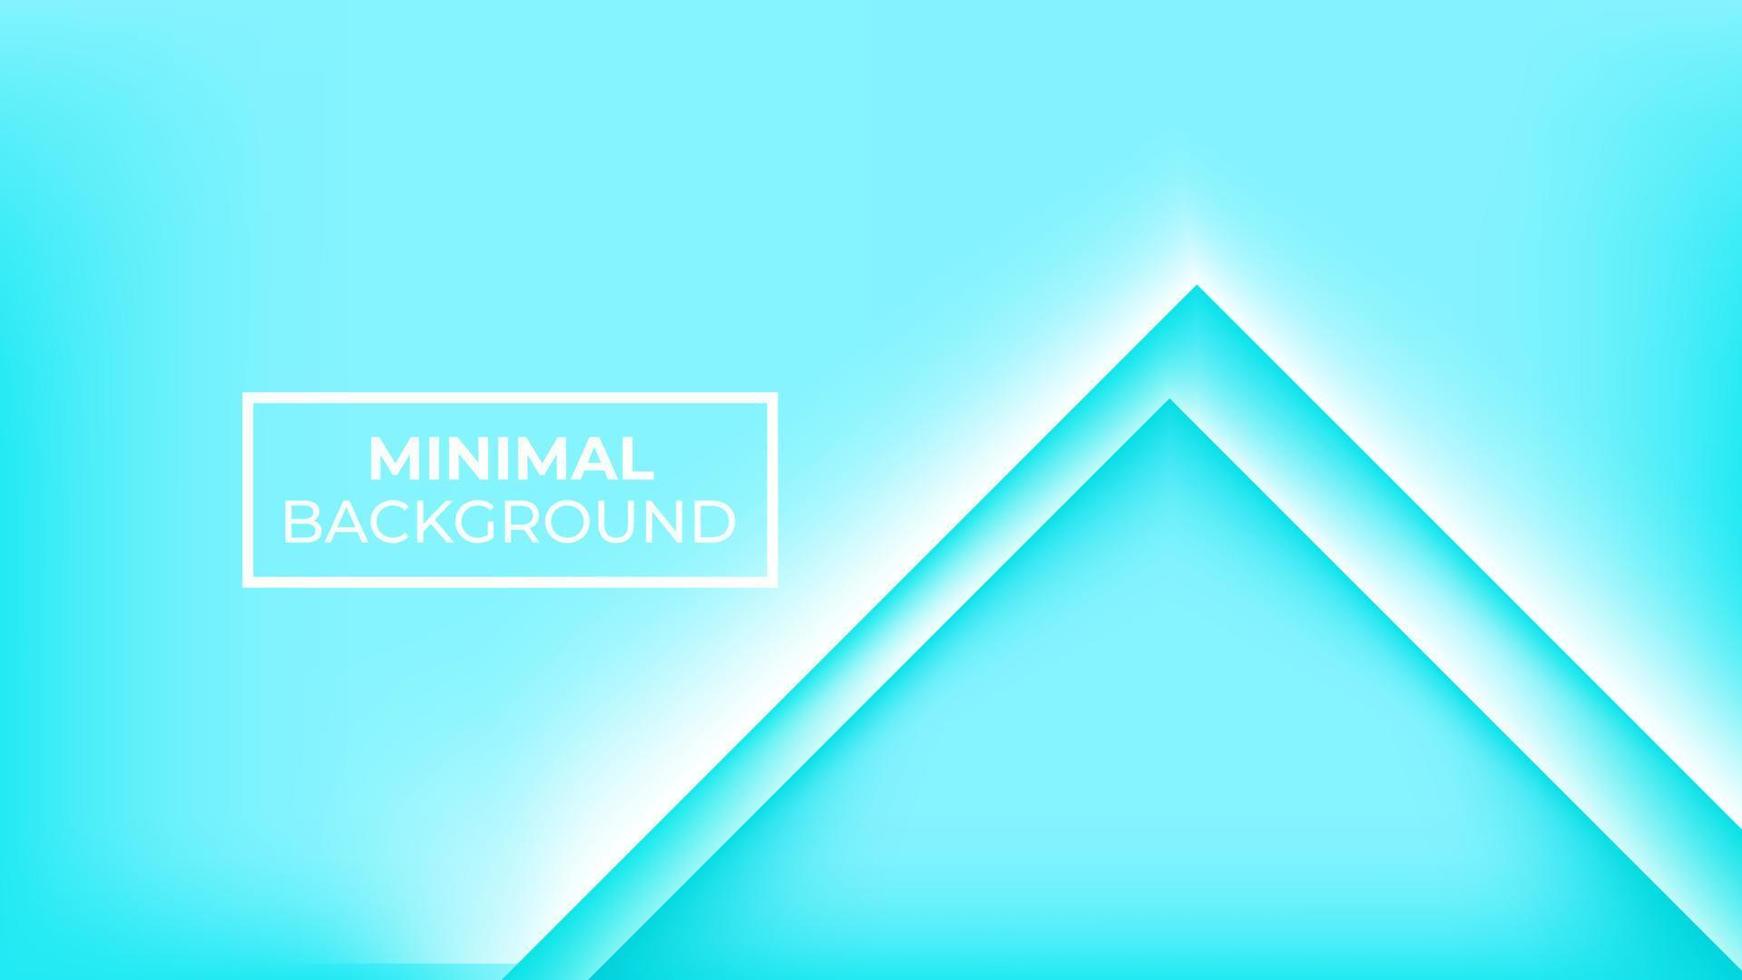 Minimal background light blue color and has two overlapping triangles on the bottom right, easy to edit vector